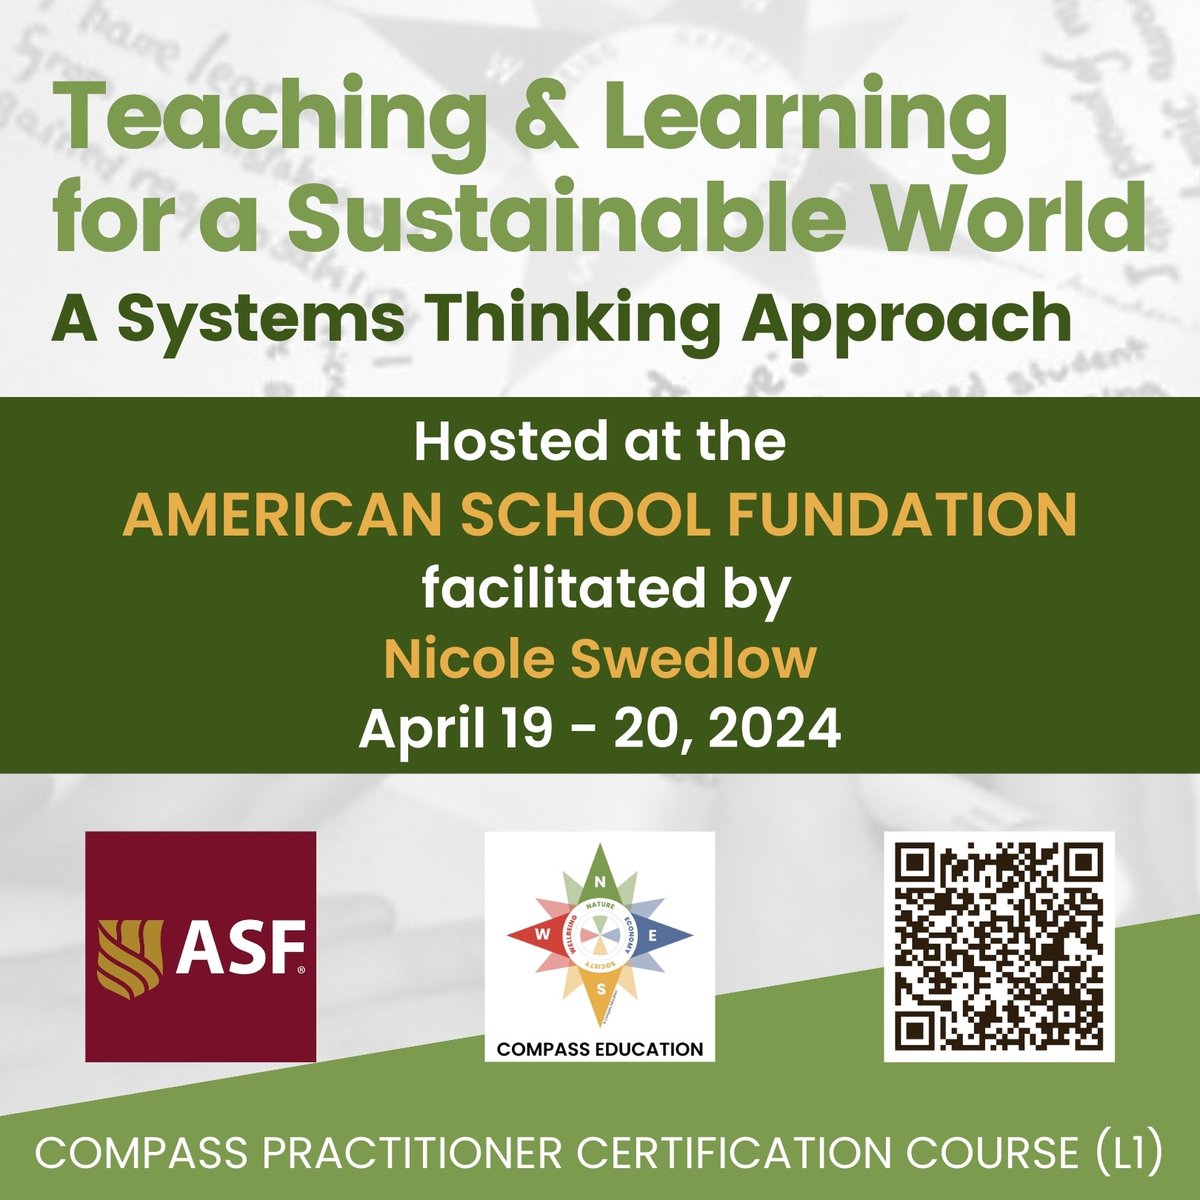 'Teaching for a Sustainable World: A Systems Thinking Approach': Join us to integrate sustainability & systems thinking into your work, and connect with like-minded individuals passionate about teaching & learning for a more sustainable world. LEARN MORE: tinyurl.com/4t4jsr6w